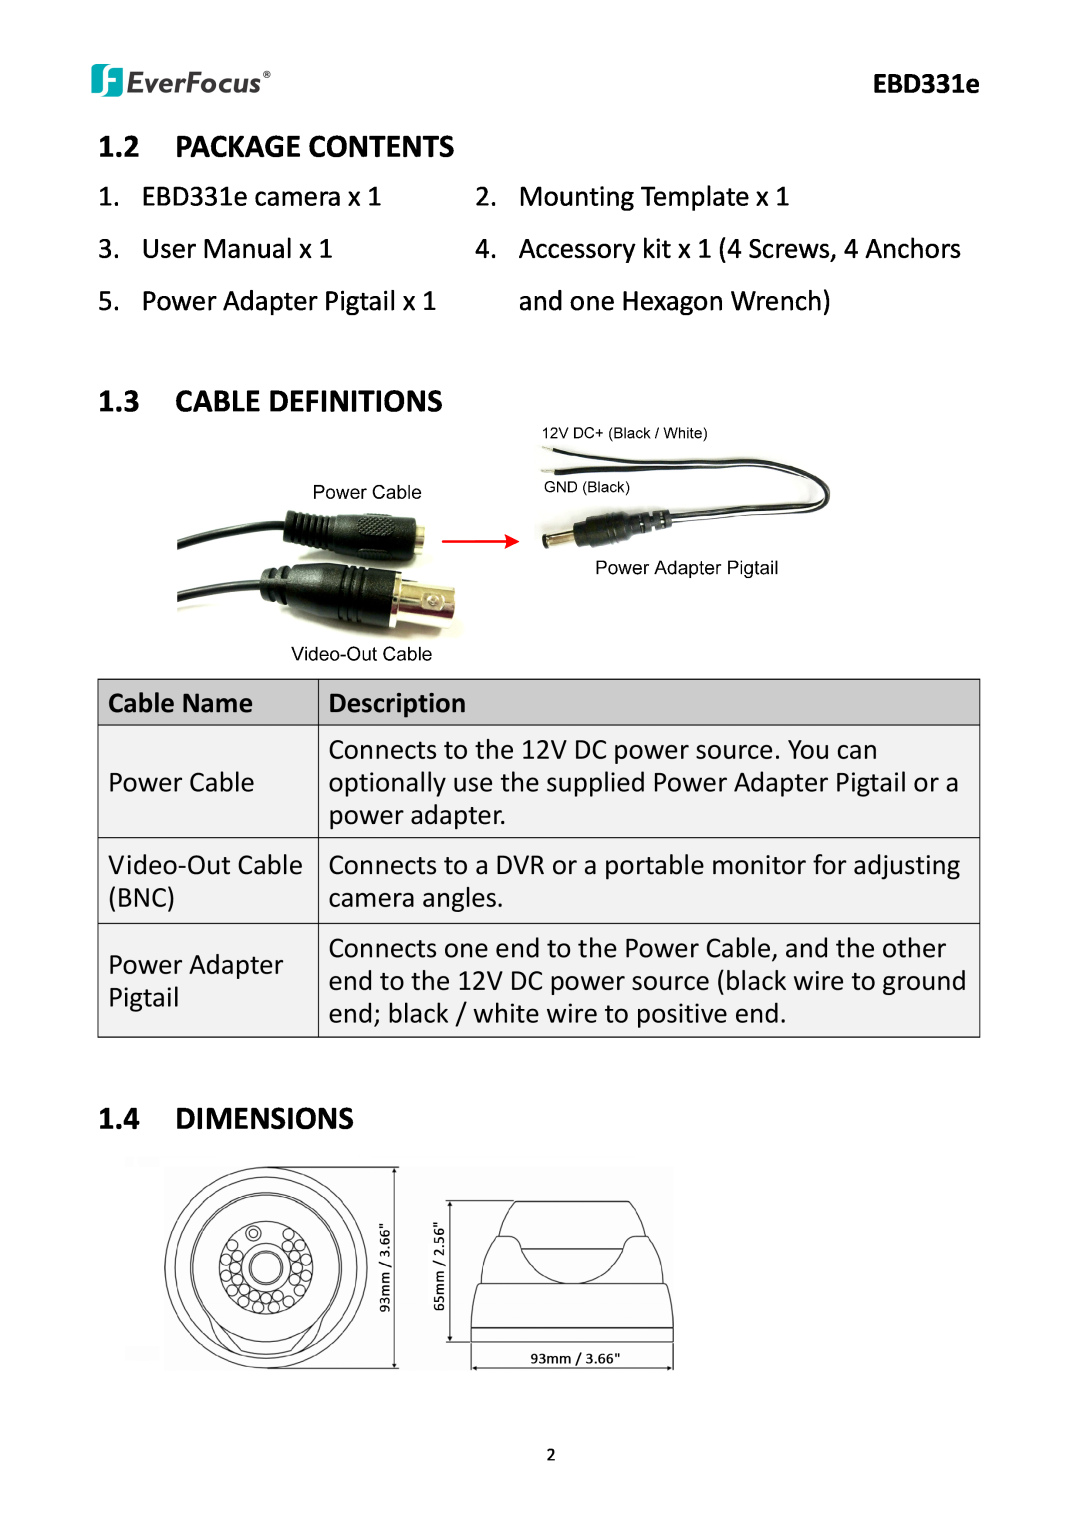 EverFocus EBD331e user manual Package Contents, Cable Definitions, Dimensions 